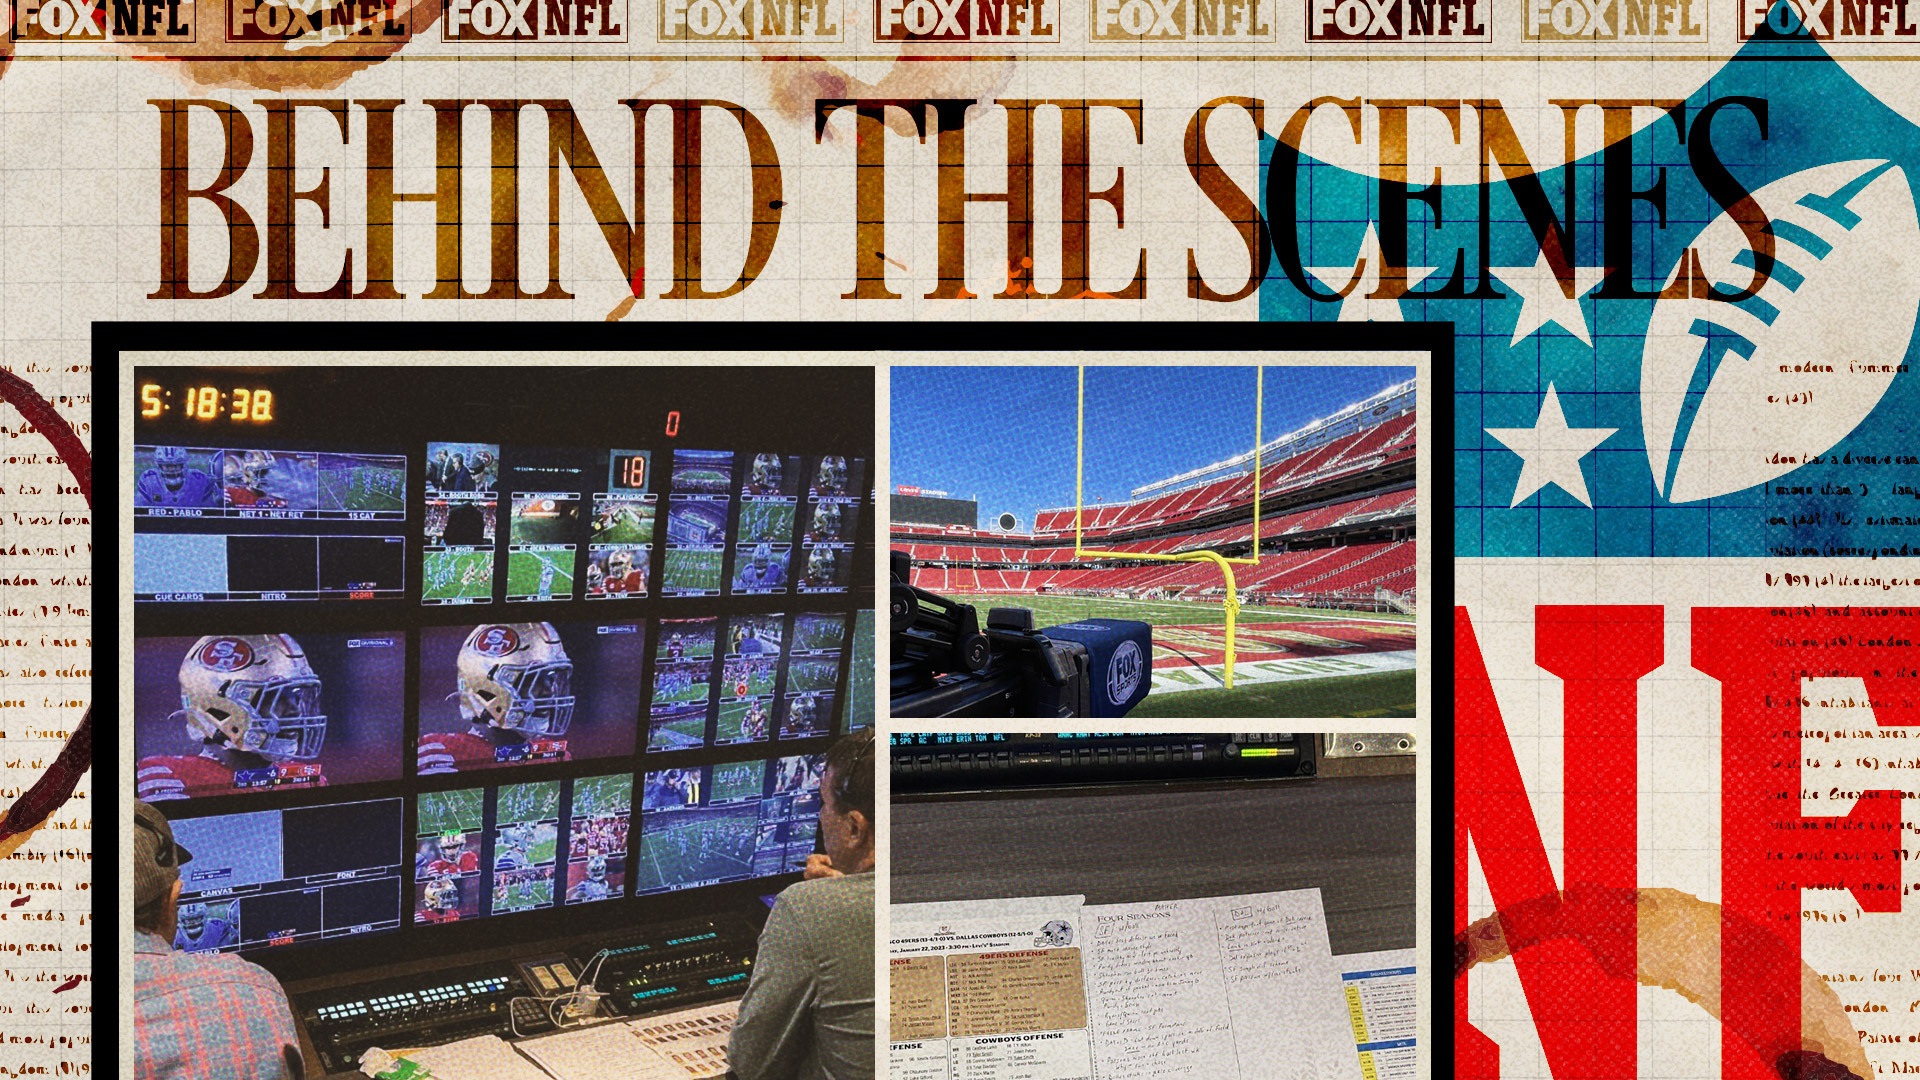 Behind the Scenes with FOX's NFL crew: A historic rivalry; camera magnets